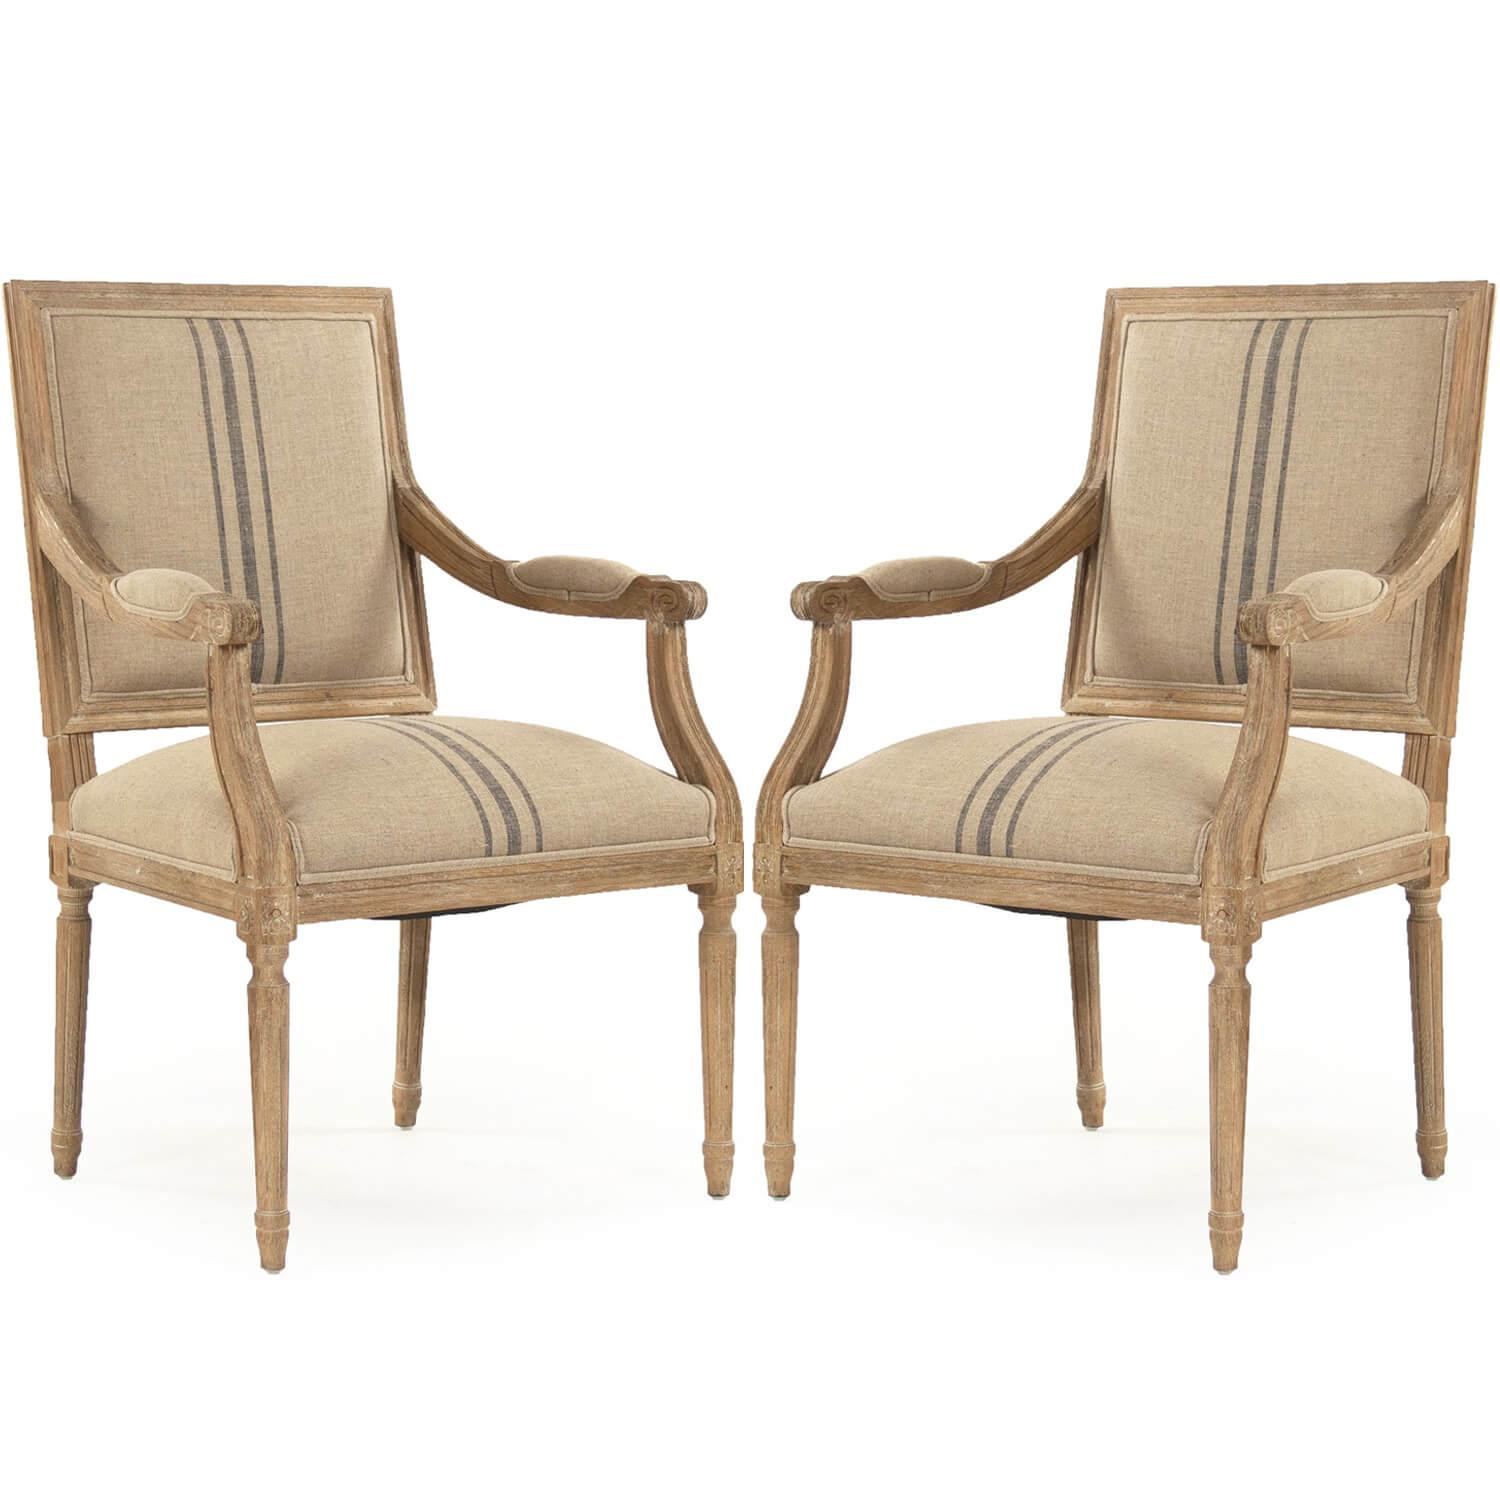 French Louis Blue Striped Dining Chairs - Belle Escape